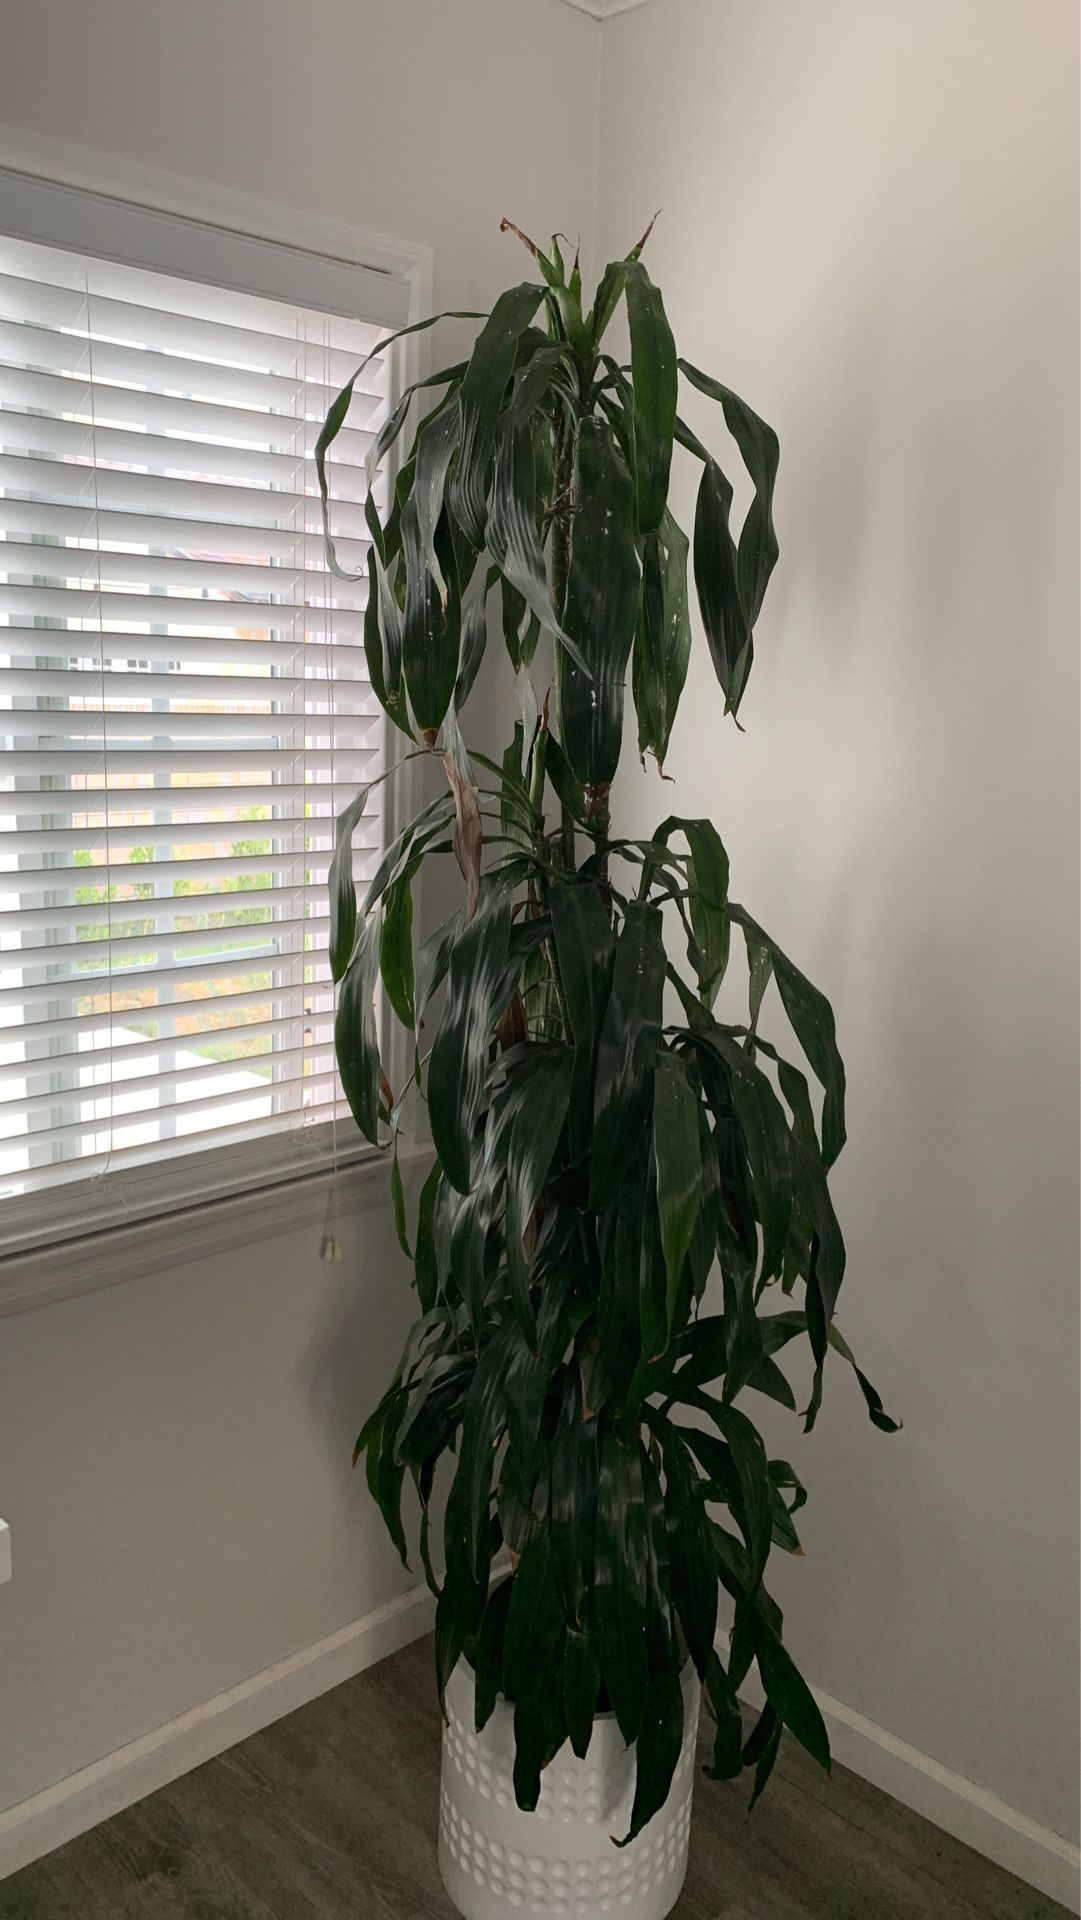 Dracena plant-over 6ft tall